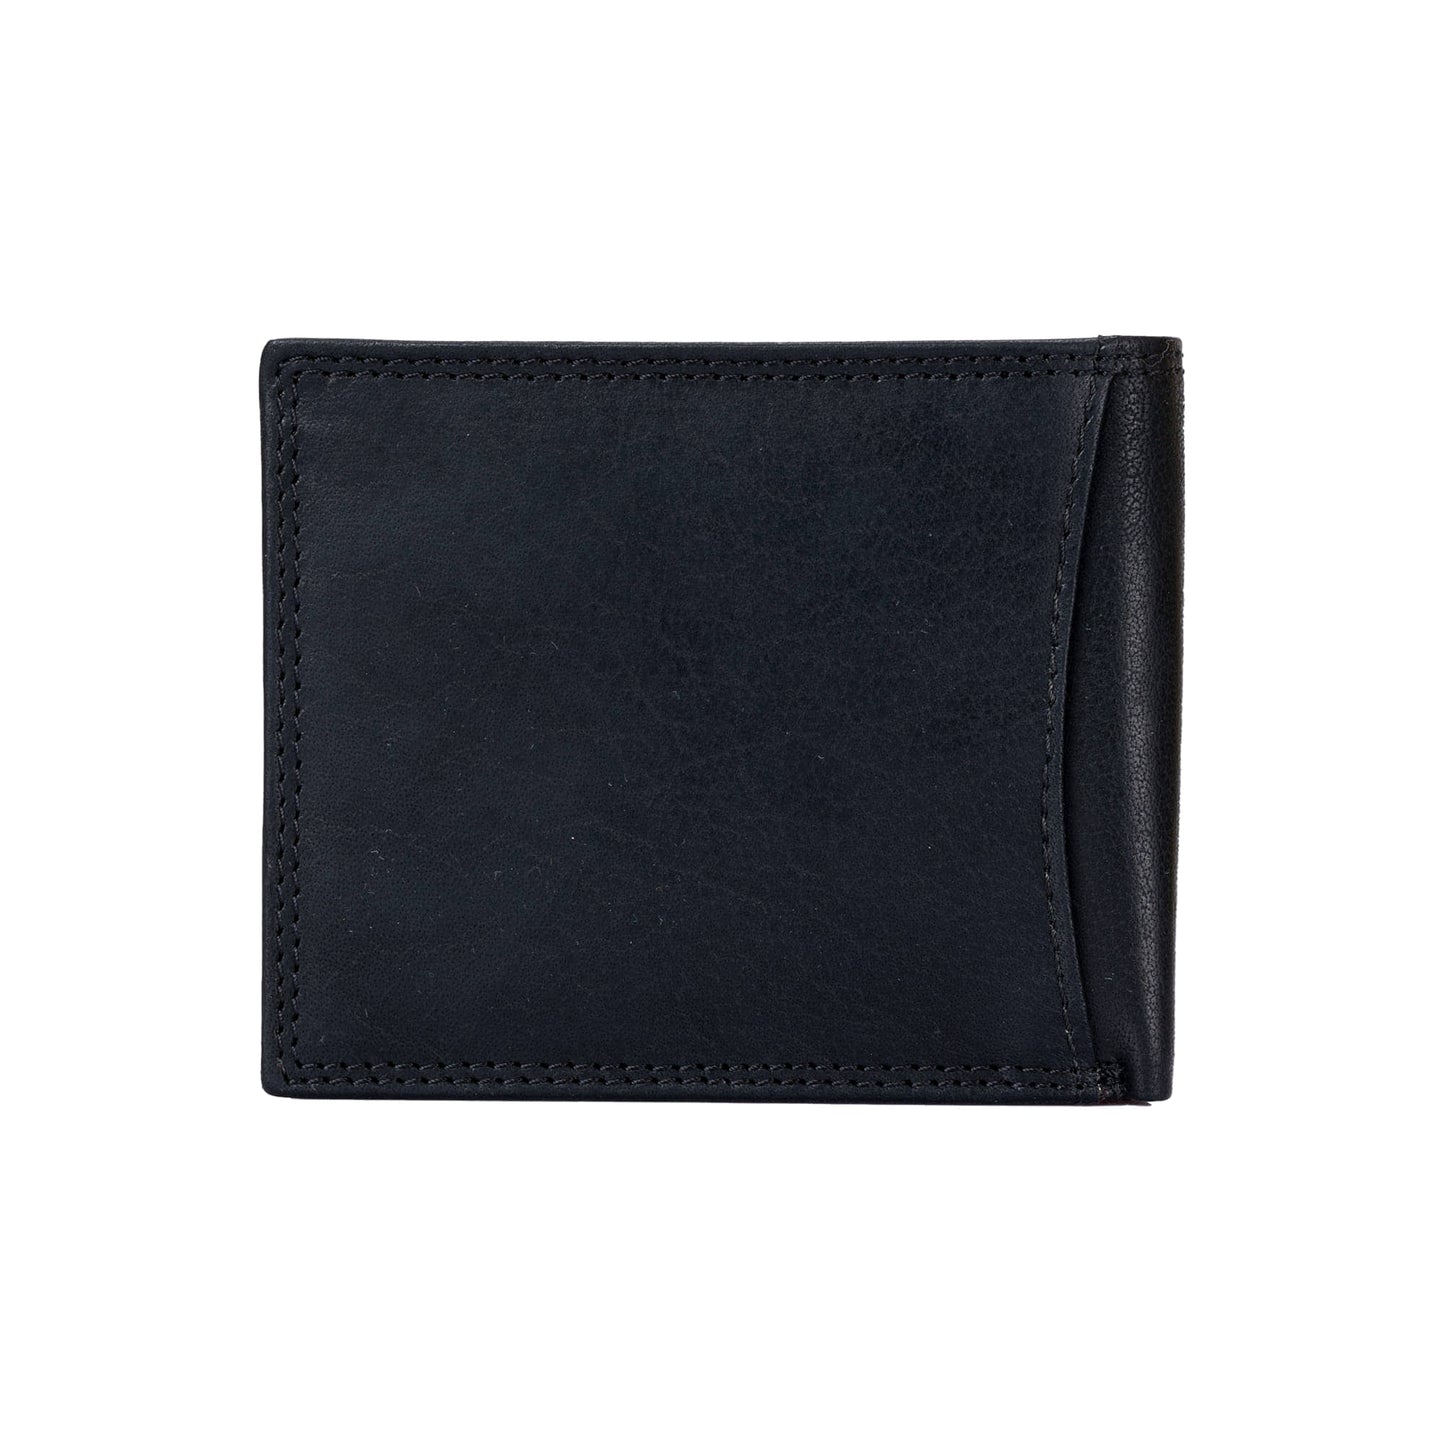 Style n Craft 300796-BL Bi-Fold Pass Case Wallet with Flap in Full Grain Leather - black color - closed back view